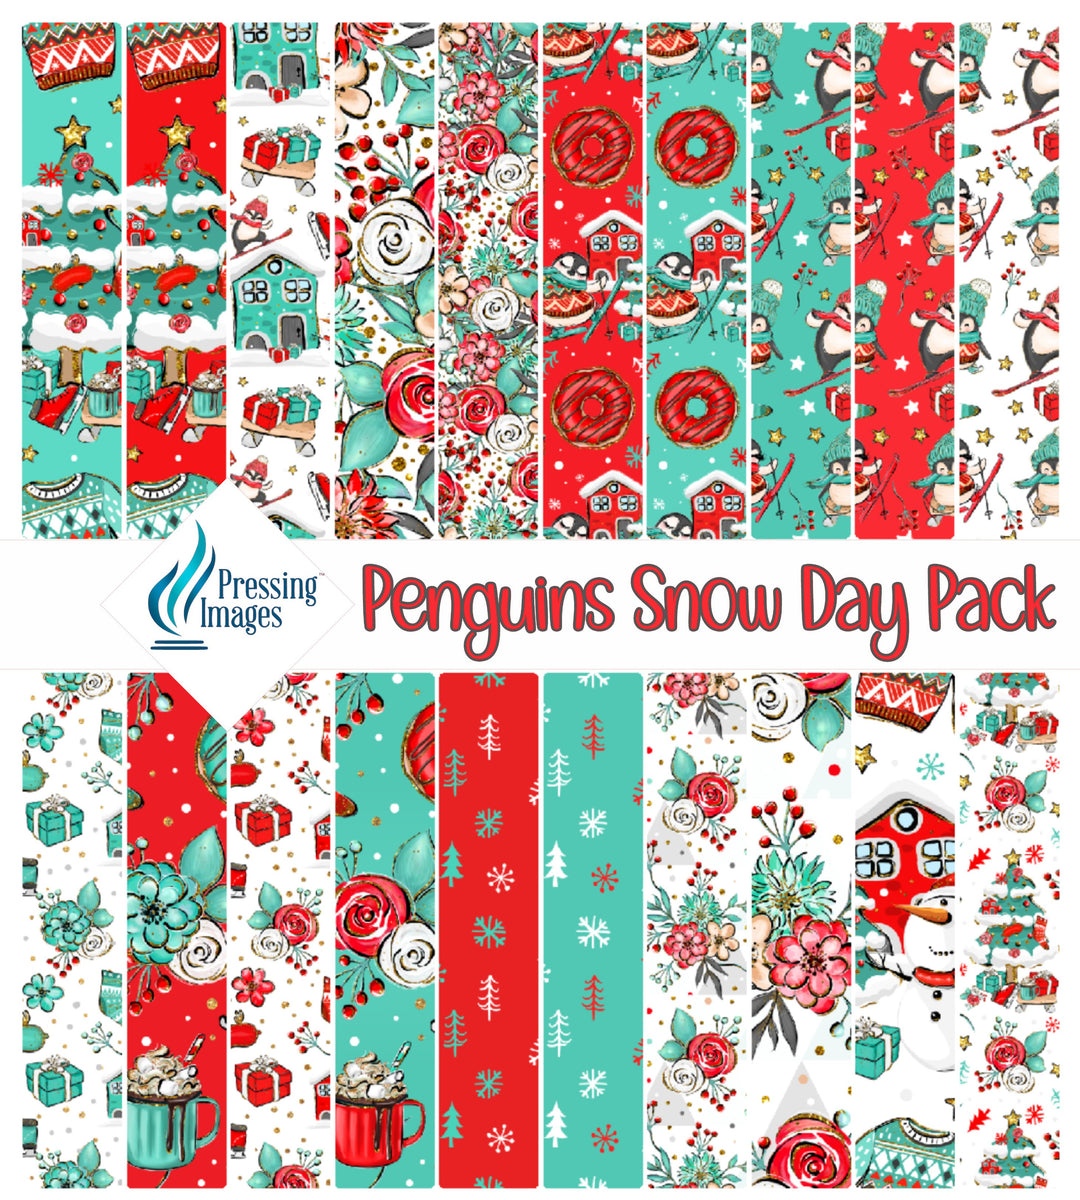 Penguins Snow Day Pack